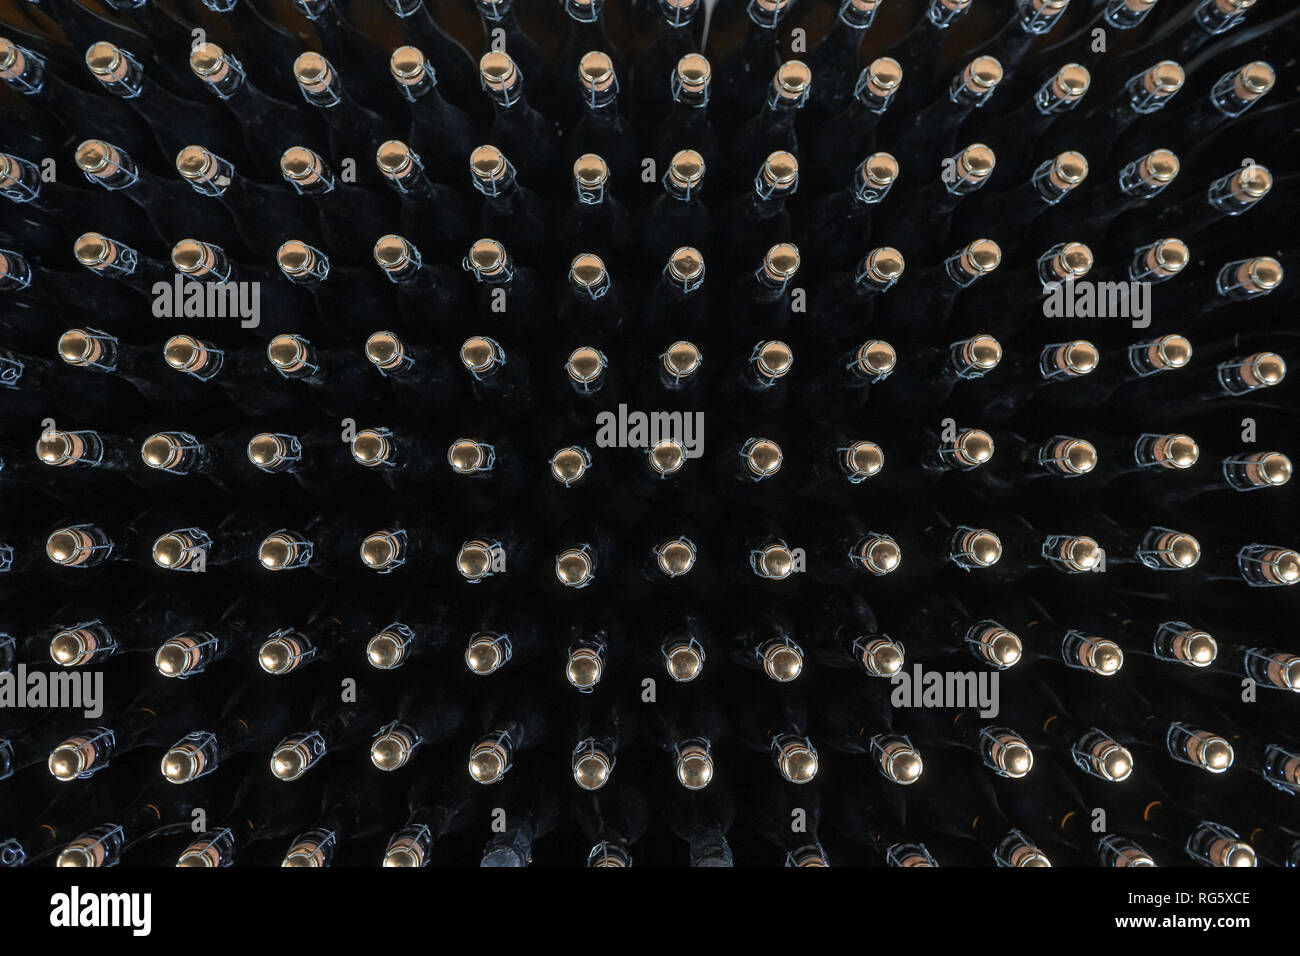 Pattern of sparkling wine bottles seen from above Stock Photo